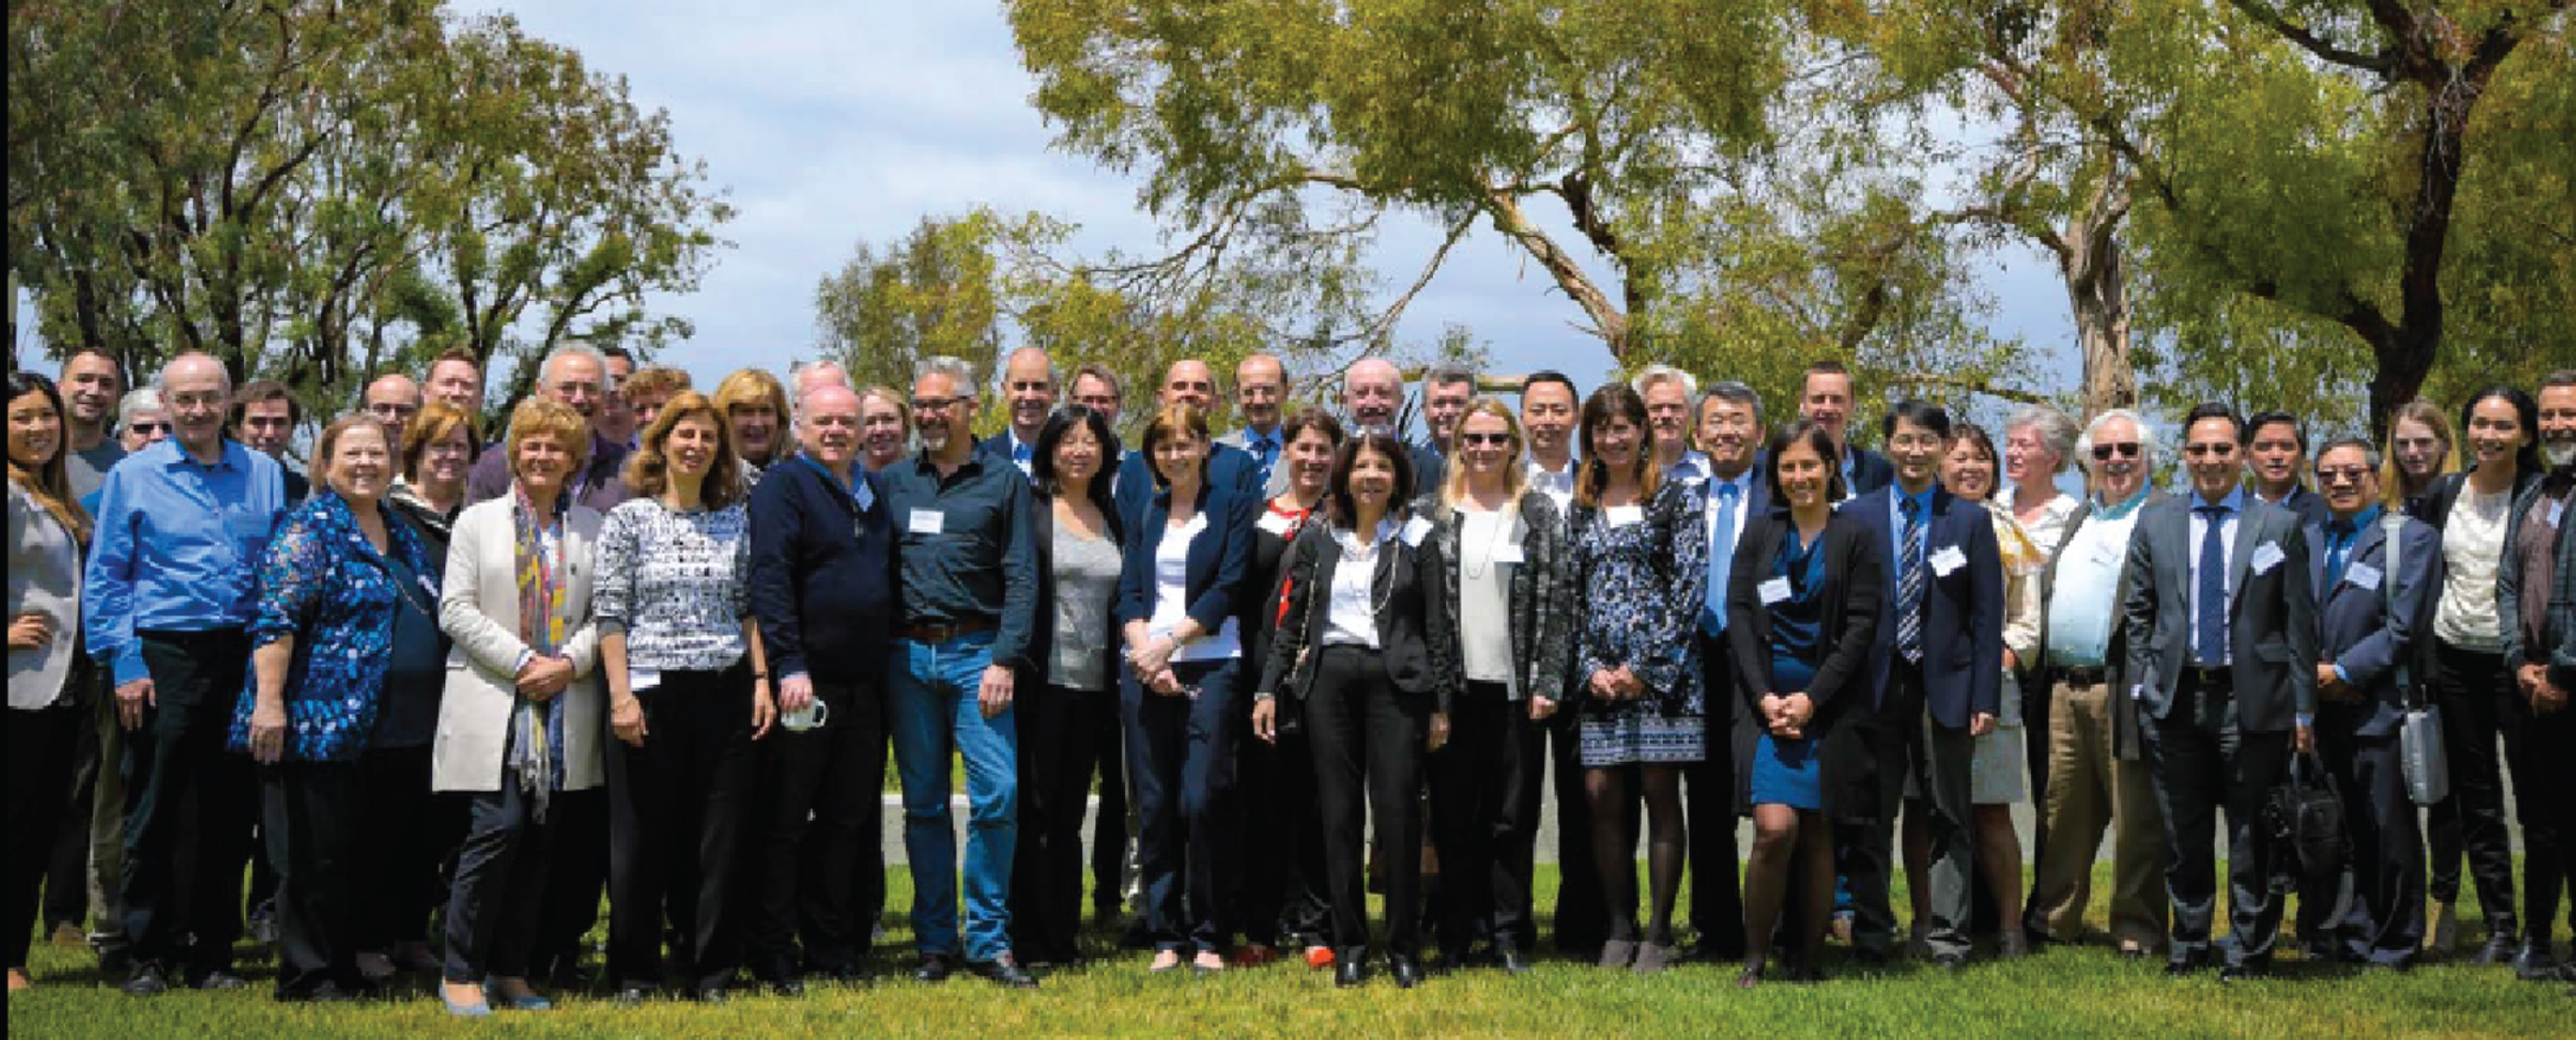 Picture of the 50 face to face attendees of the first SC4HD meeting that took place at the Beckman Center for National Academies of Science, Engineering and Medicine and UC Irvine Stem Cell Research Center.